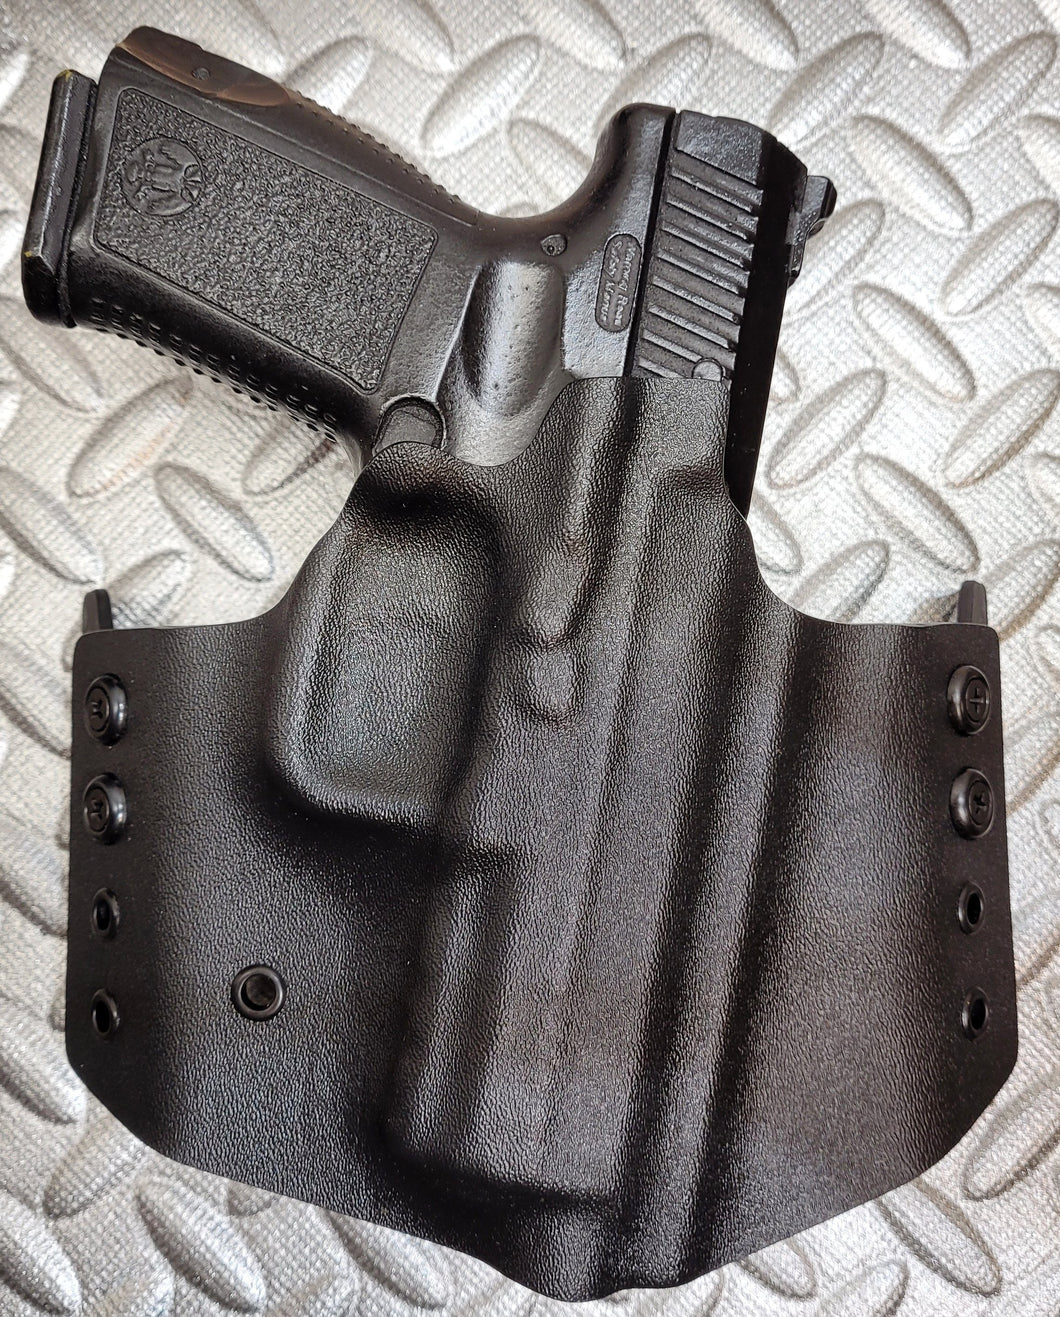 CANIK TP9 ELITE Sub-Compact W/Cant- OWB Holster (RMR Cut)